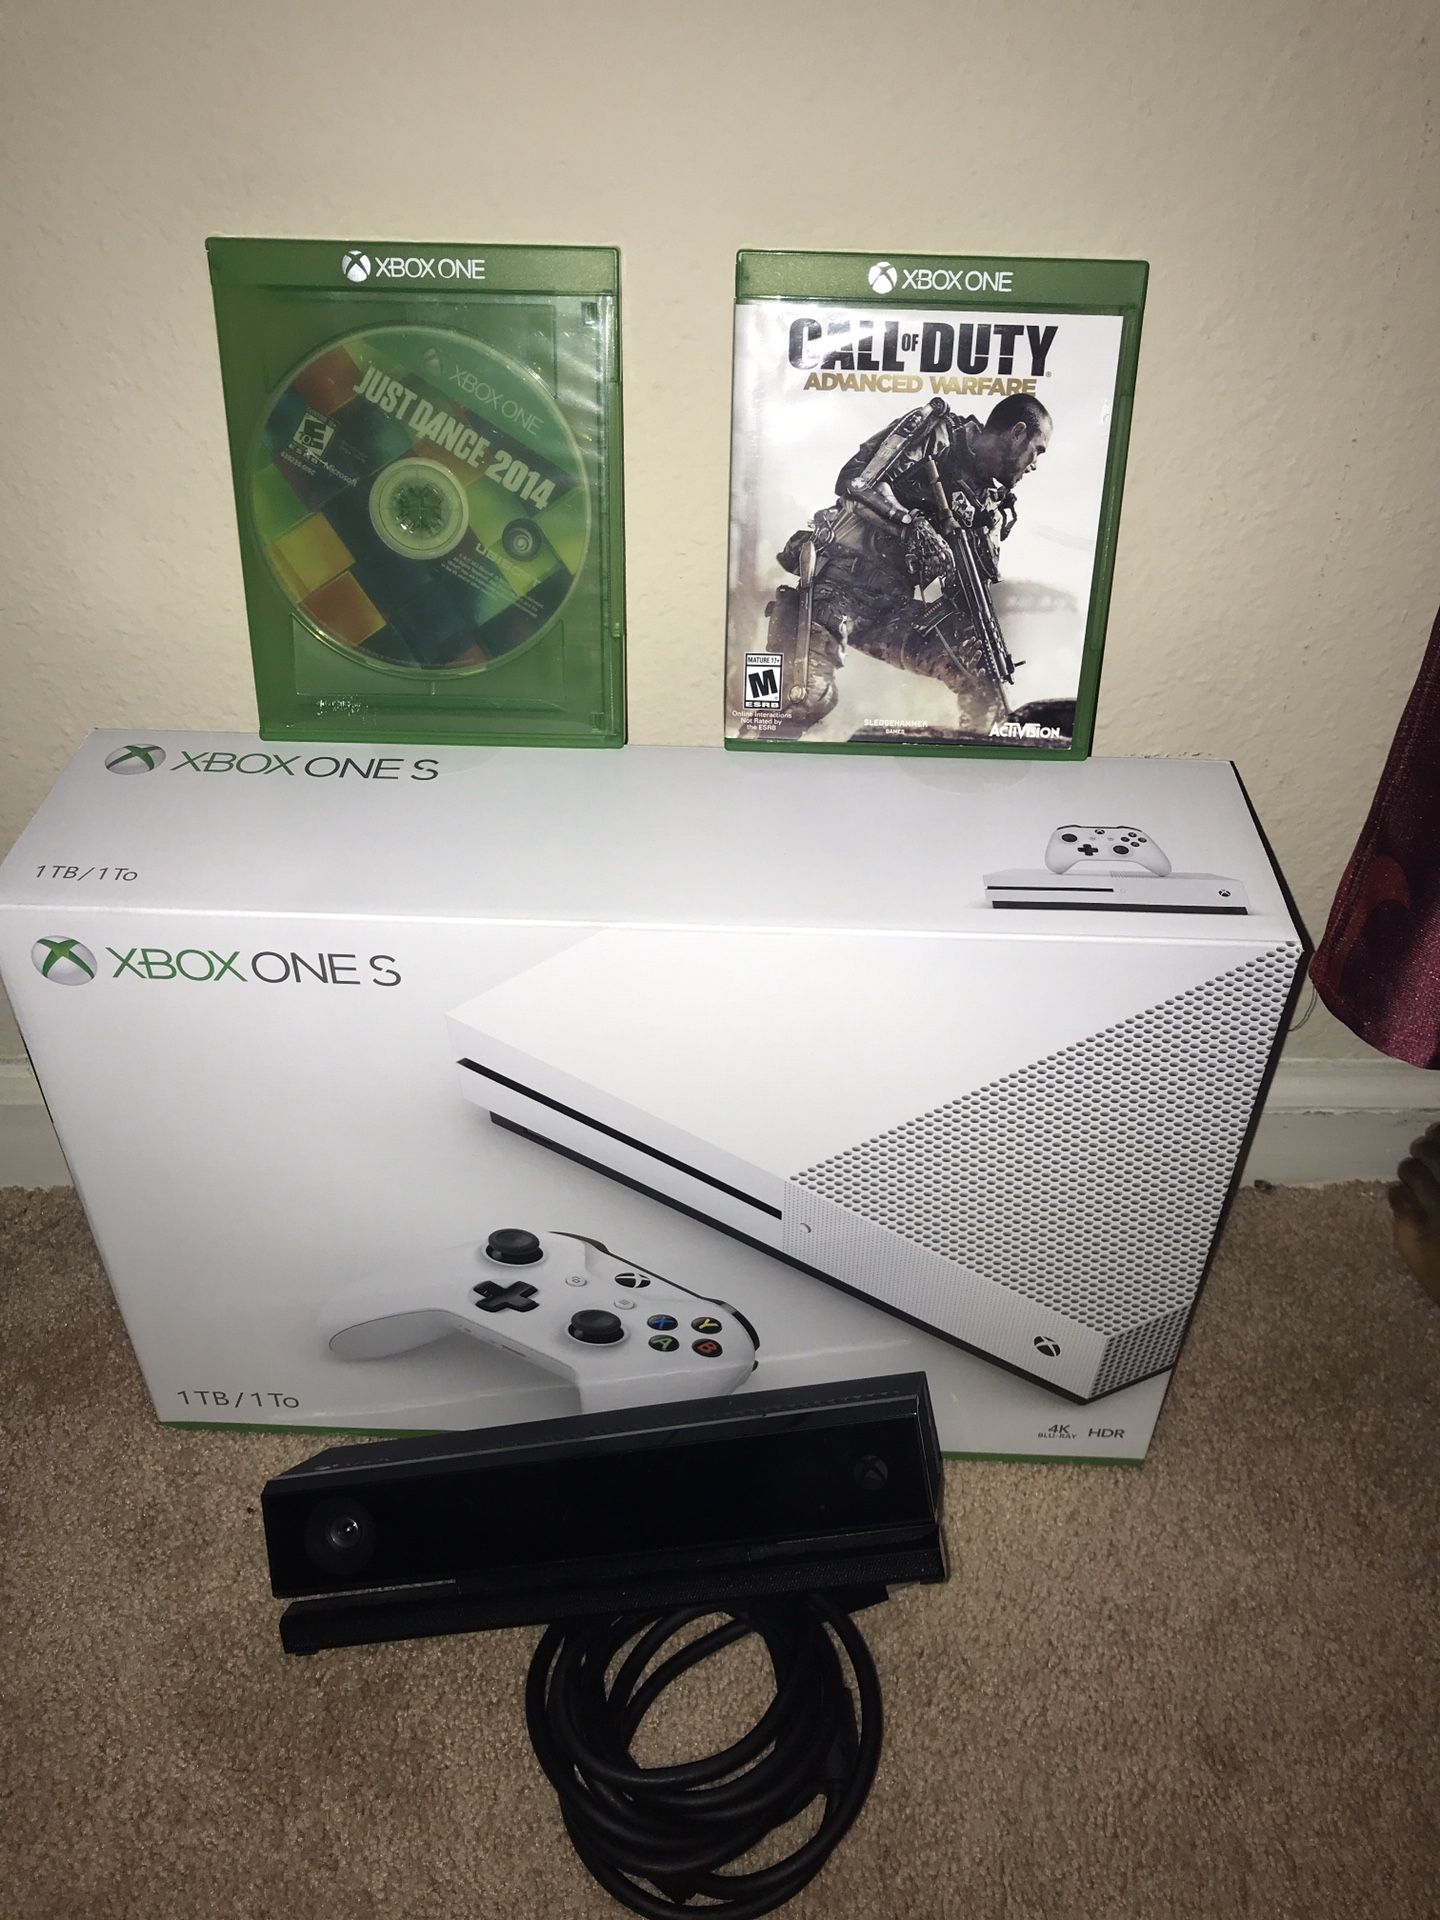 Brand New Sealed XBox One S with Kinect Sensor and 2 Games Disc